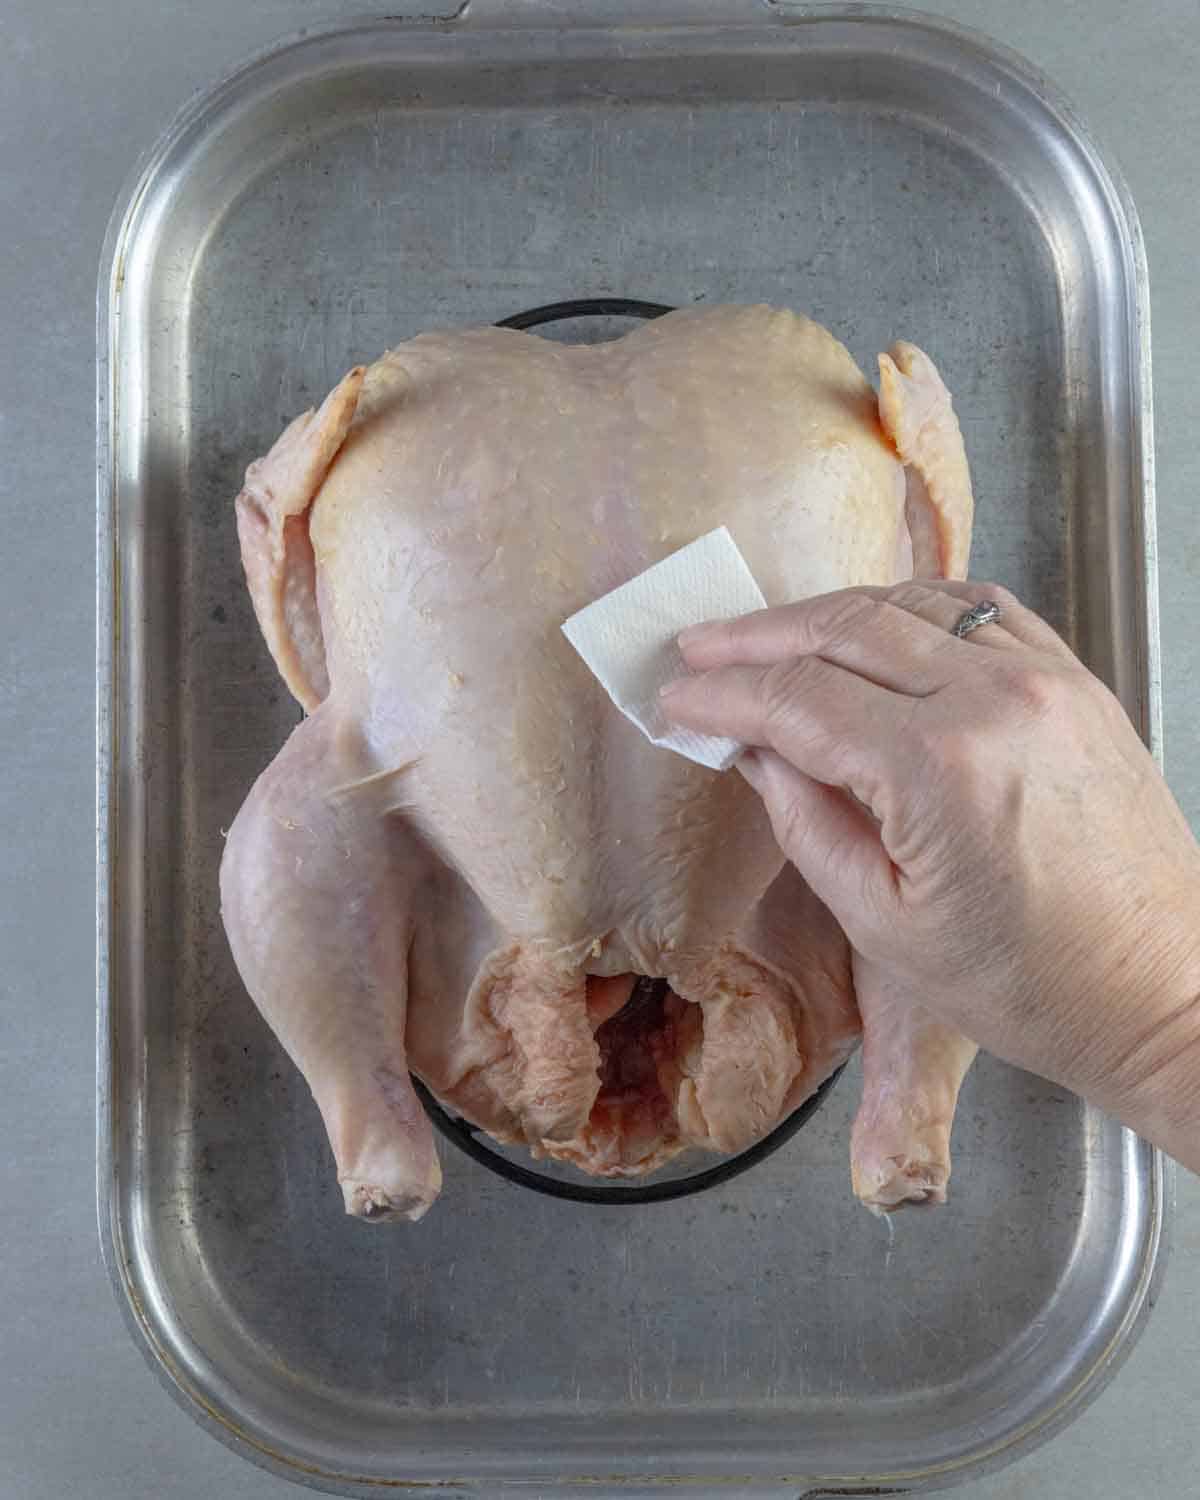 Removing excess moisture from whole raw chicken with a paper towel.